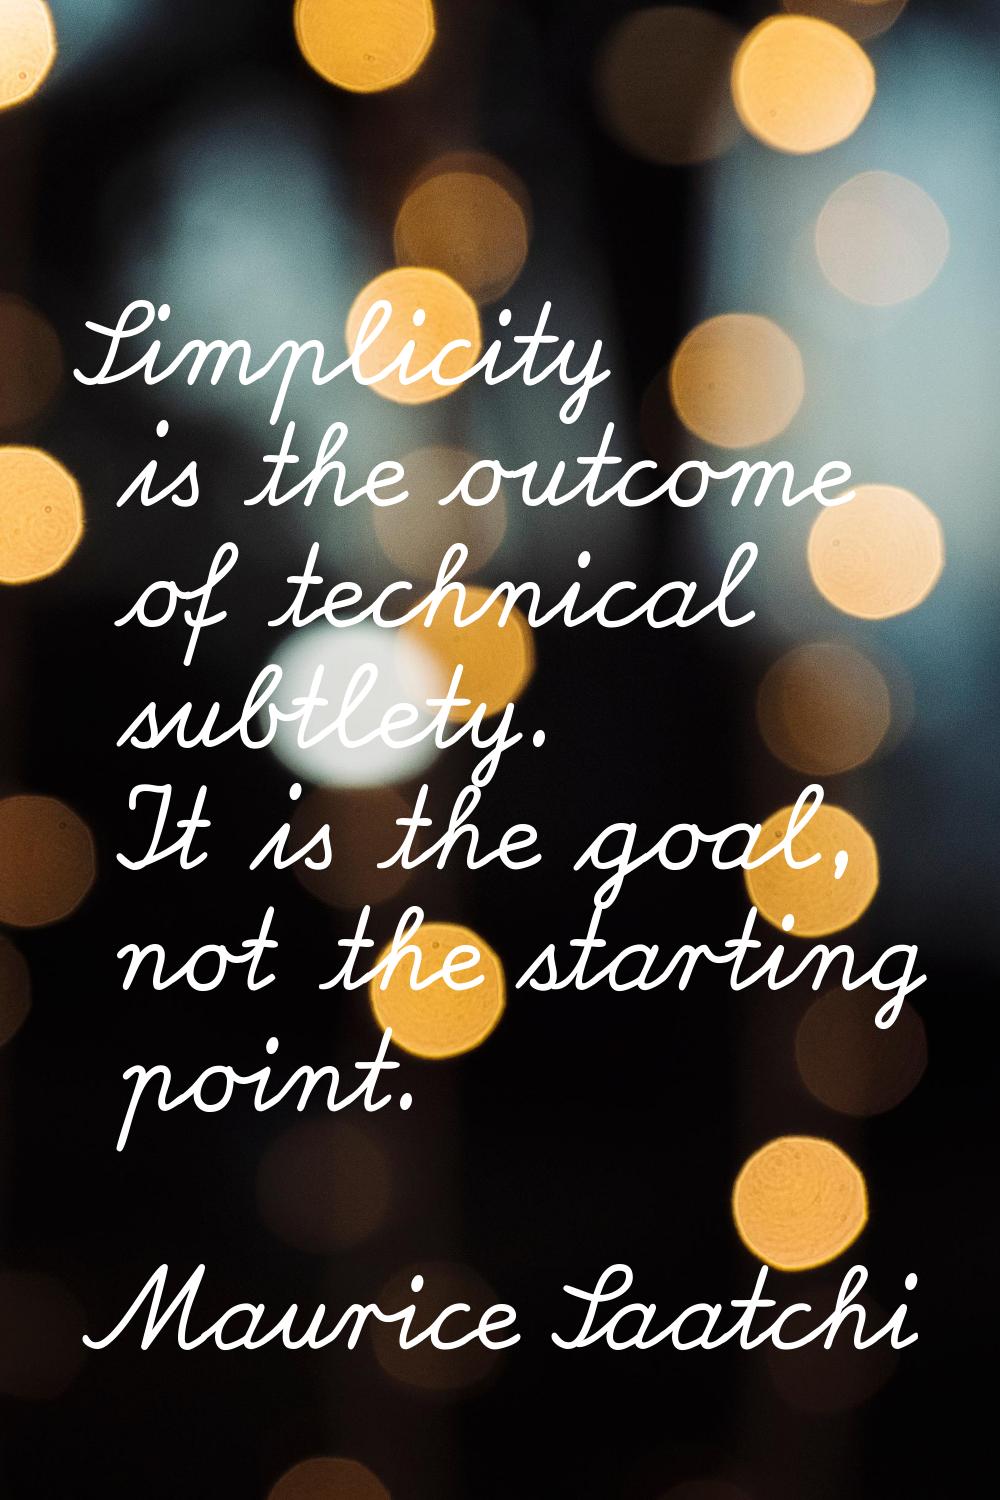 Simplicity is the outcome of technical subtlety. It is the goal, not the starting point.